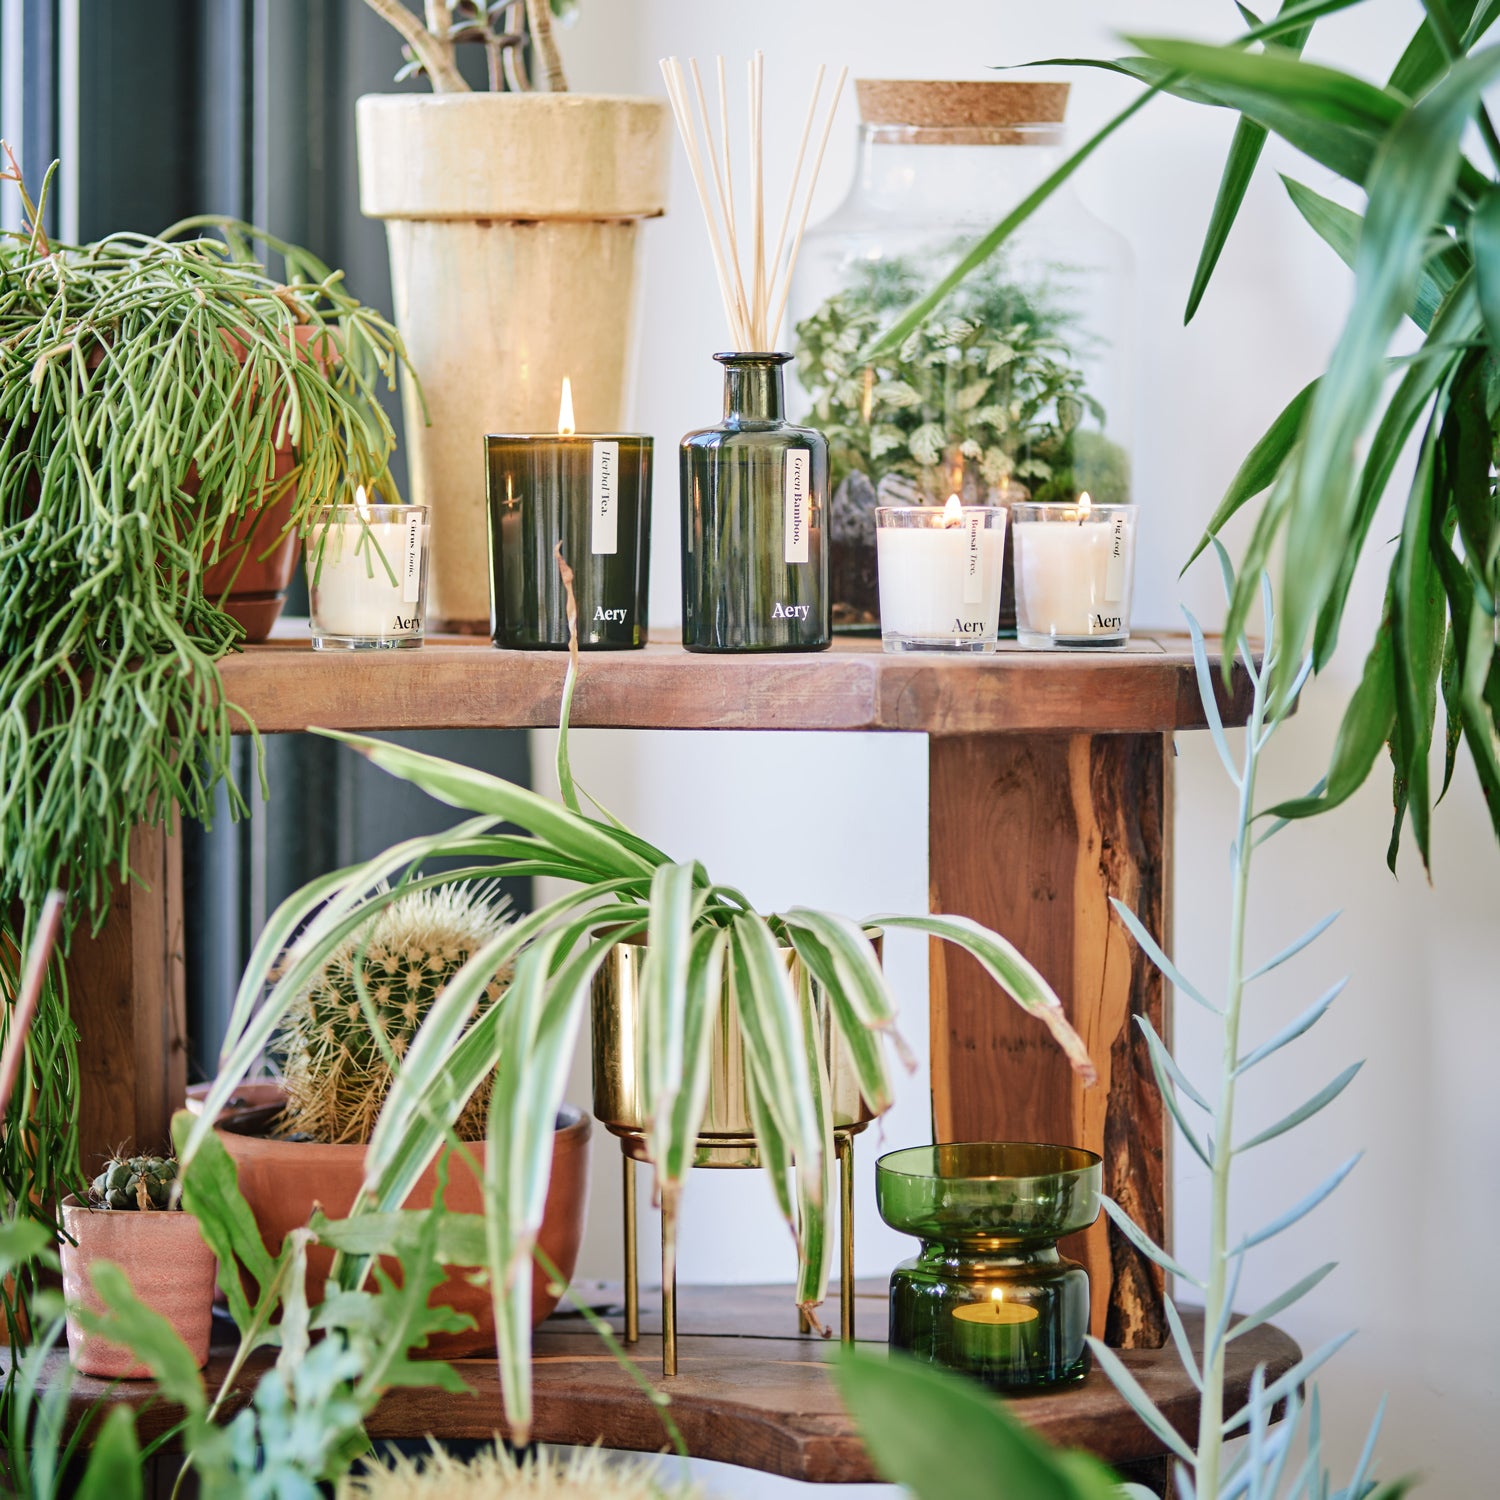 decorative shelving display of botanical aery candles surrounded by indoor house plants